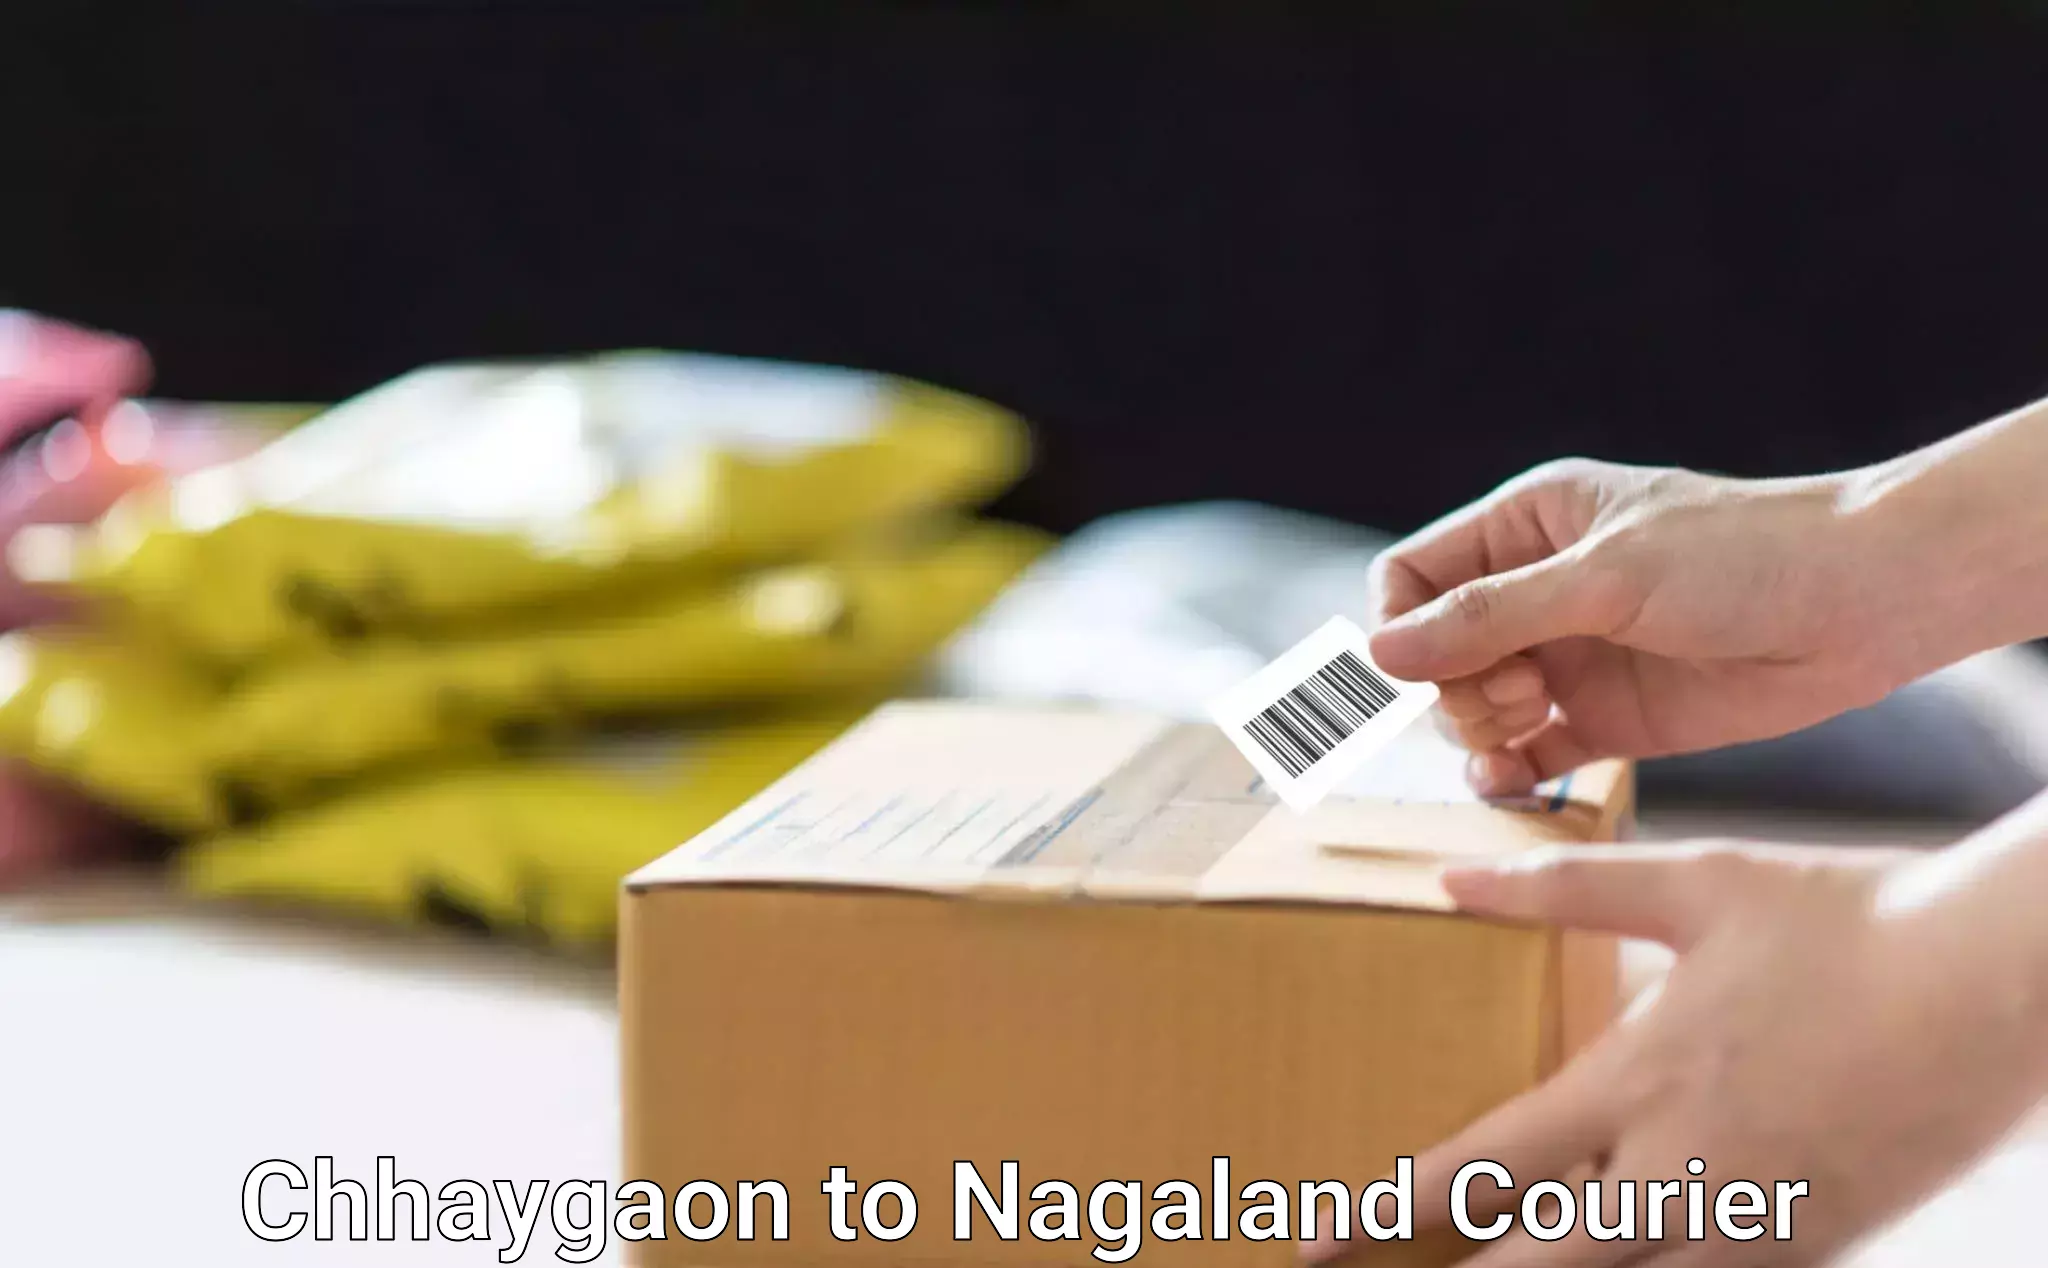 User-friendly delivery service Chhaygaon to Nagaland